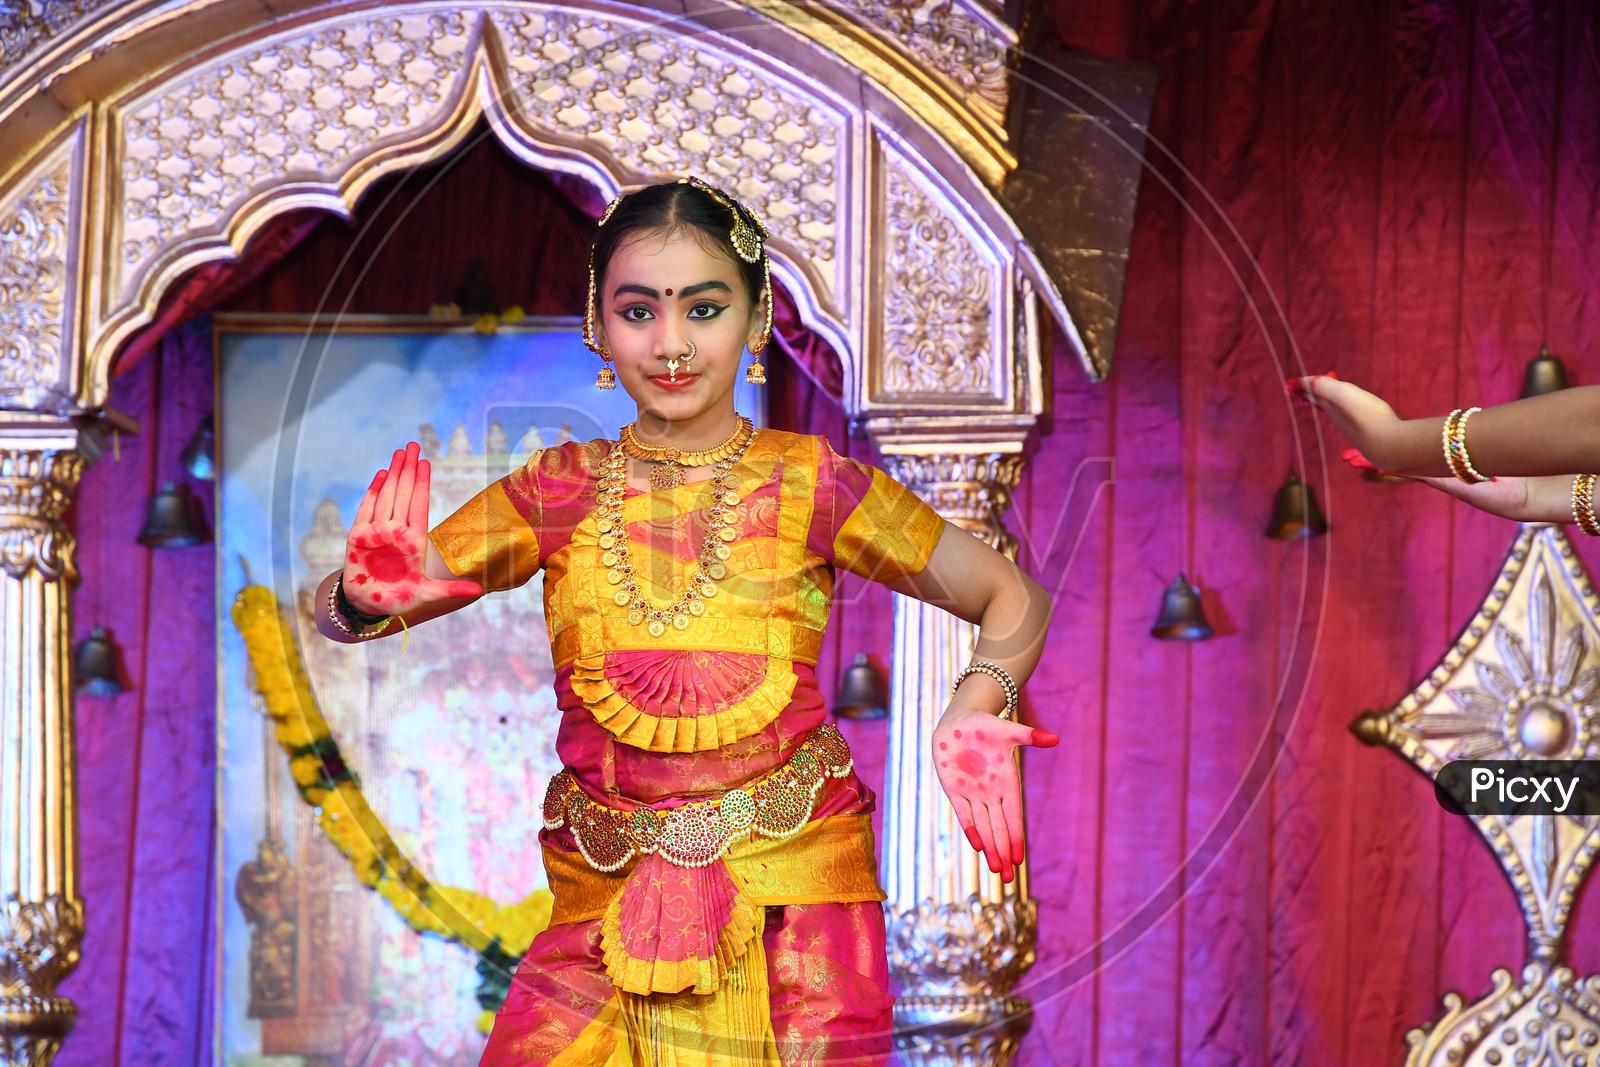 Indian Dancer Girl performing a traditional dance during Dussehra